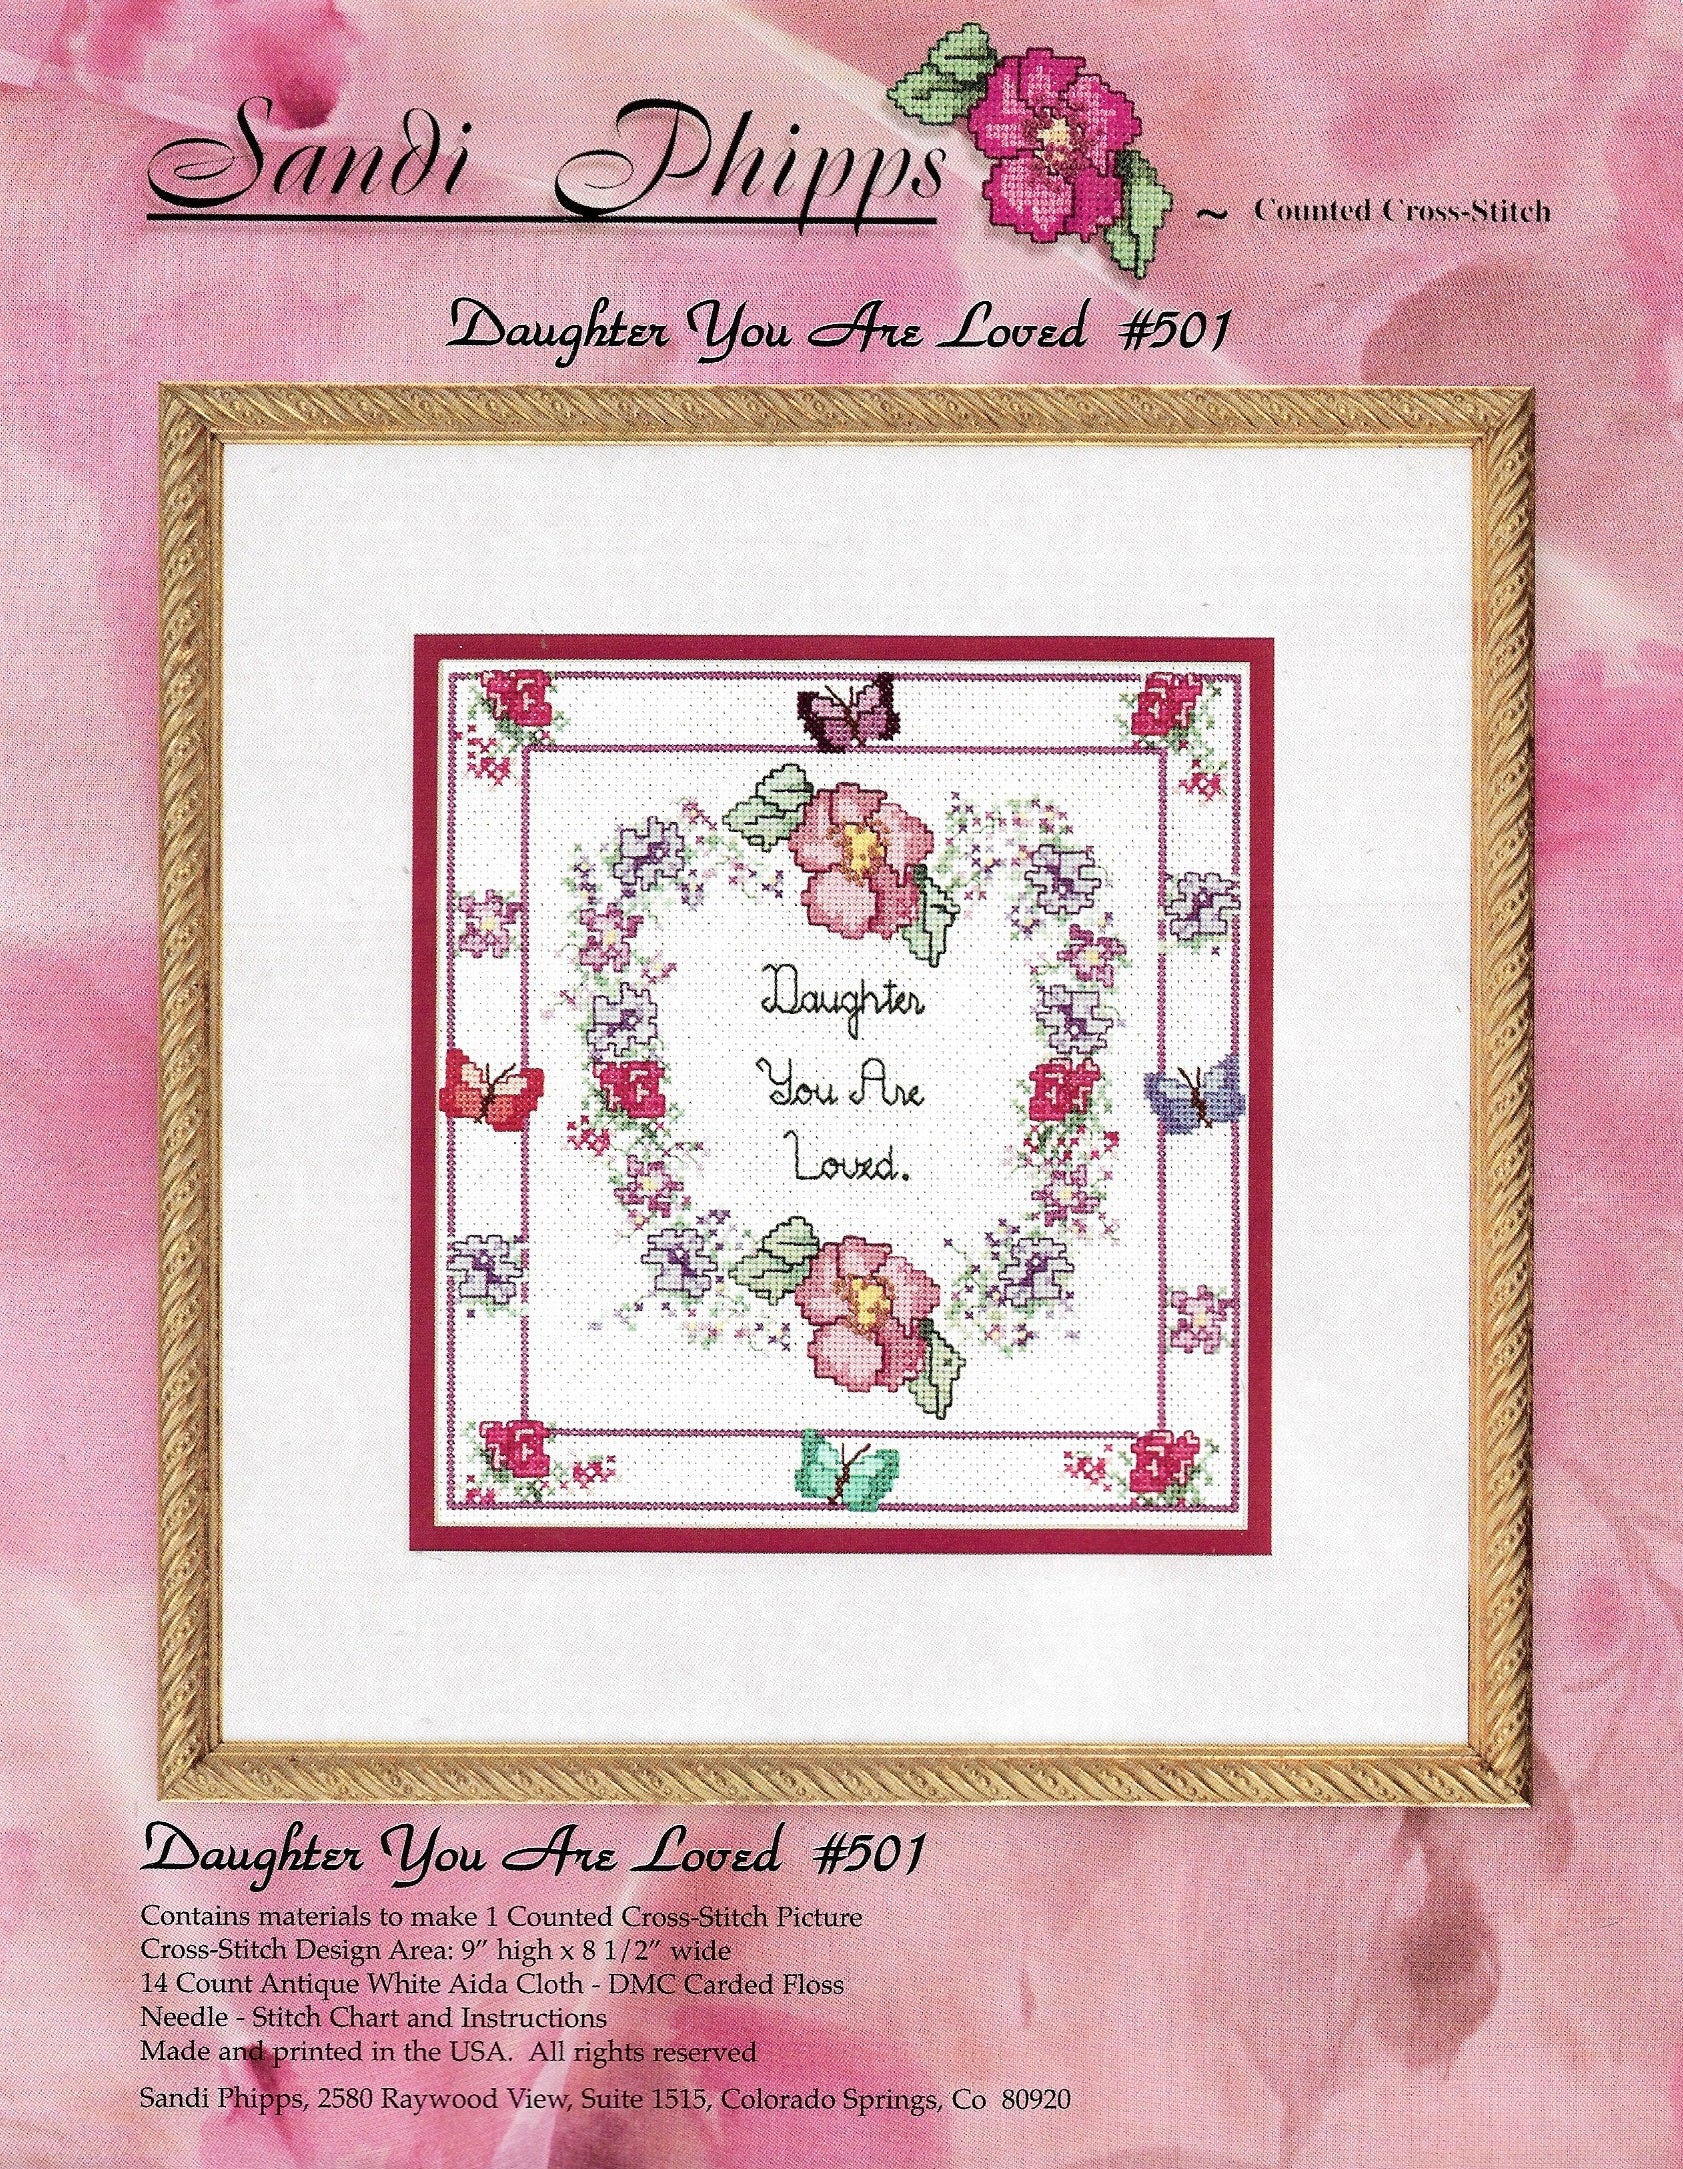 Sandi Phipps Daughter You Are Loved 501 cross stitch kit